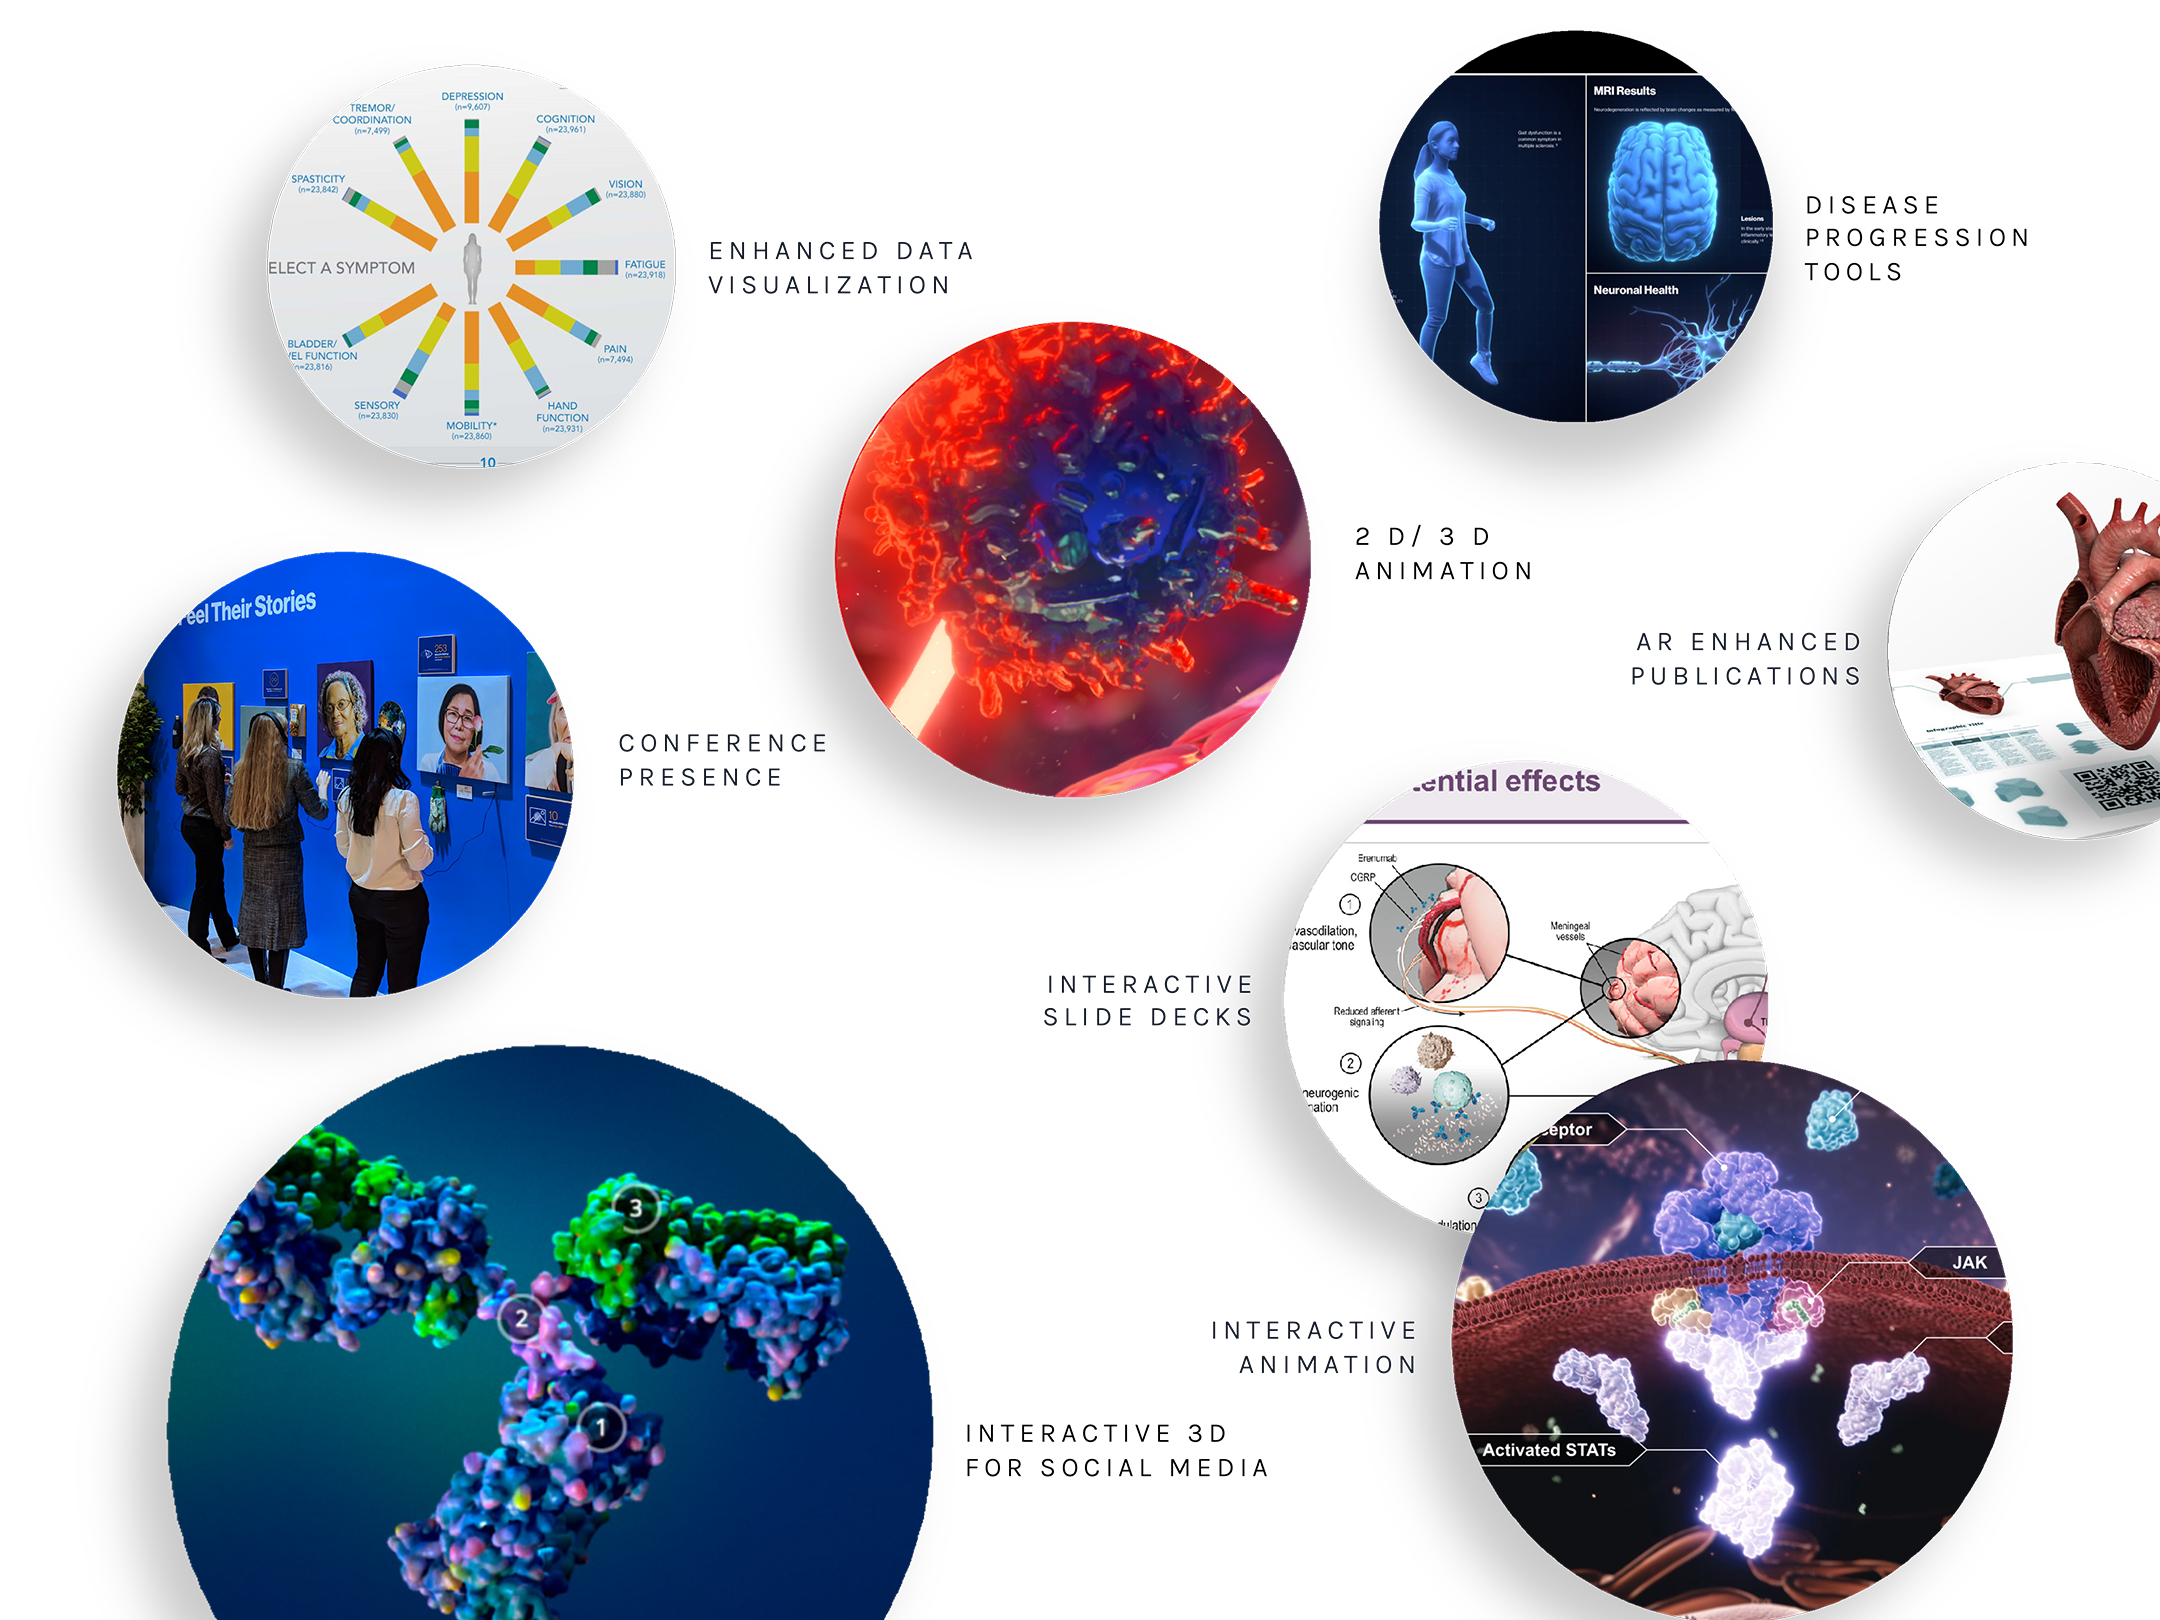 Image showing the different types of work we can create in circles, including: conference presence, interactive slide decks, interactive animation, disease progression tools, and more.